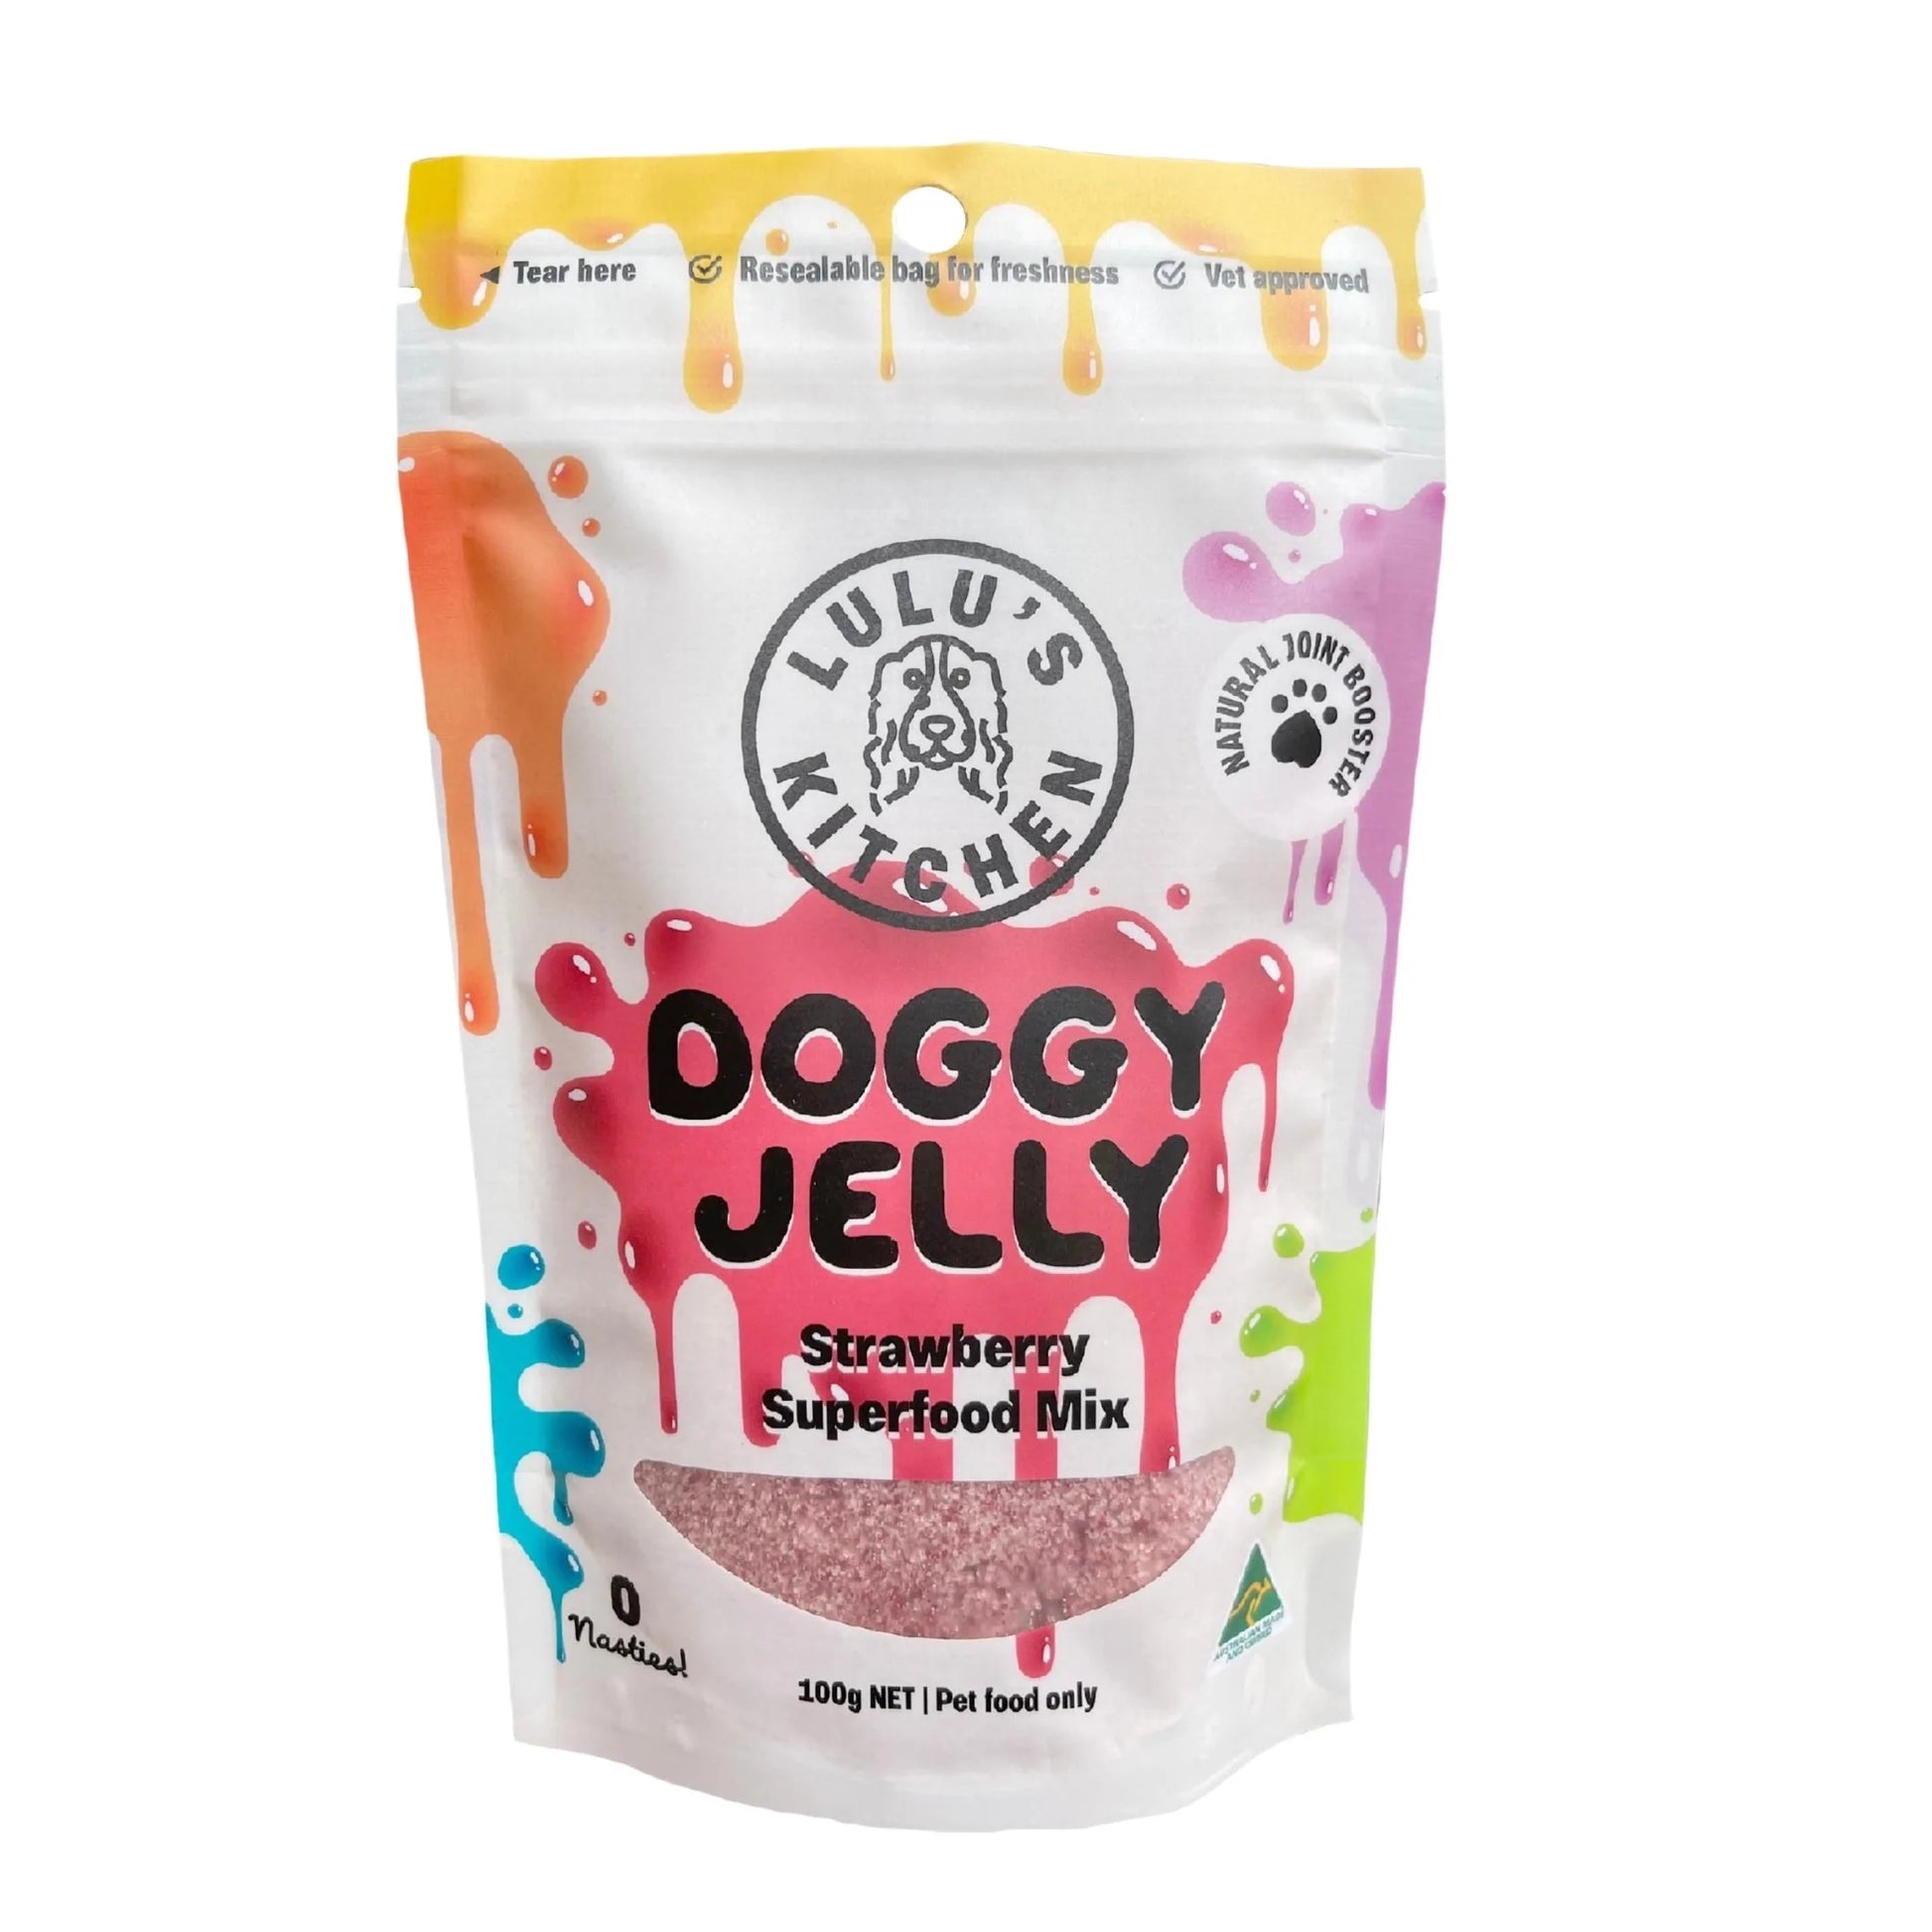 A bag of Lulu's Kitchen: Doggy Jelly - Strawberry on a white background, available from Your Whole Dog.